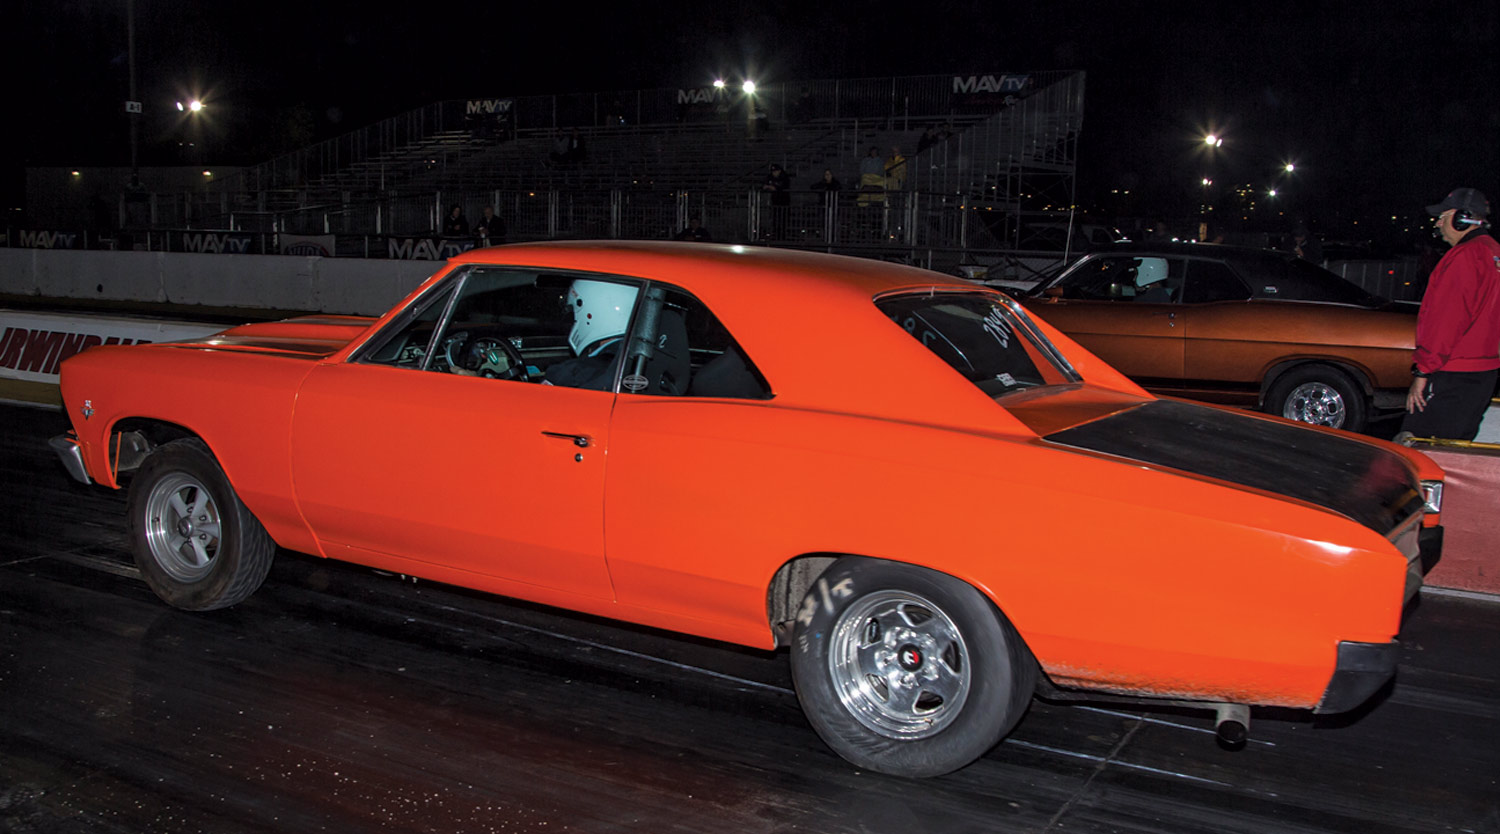 driver side profile view of an orange car at a night drag race